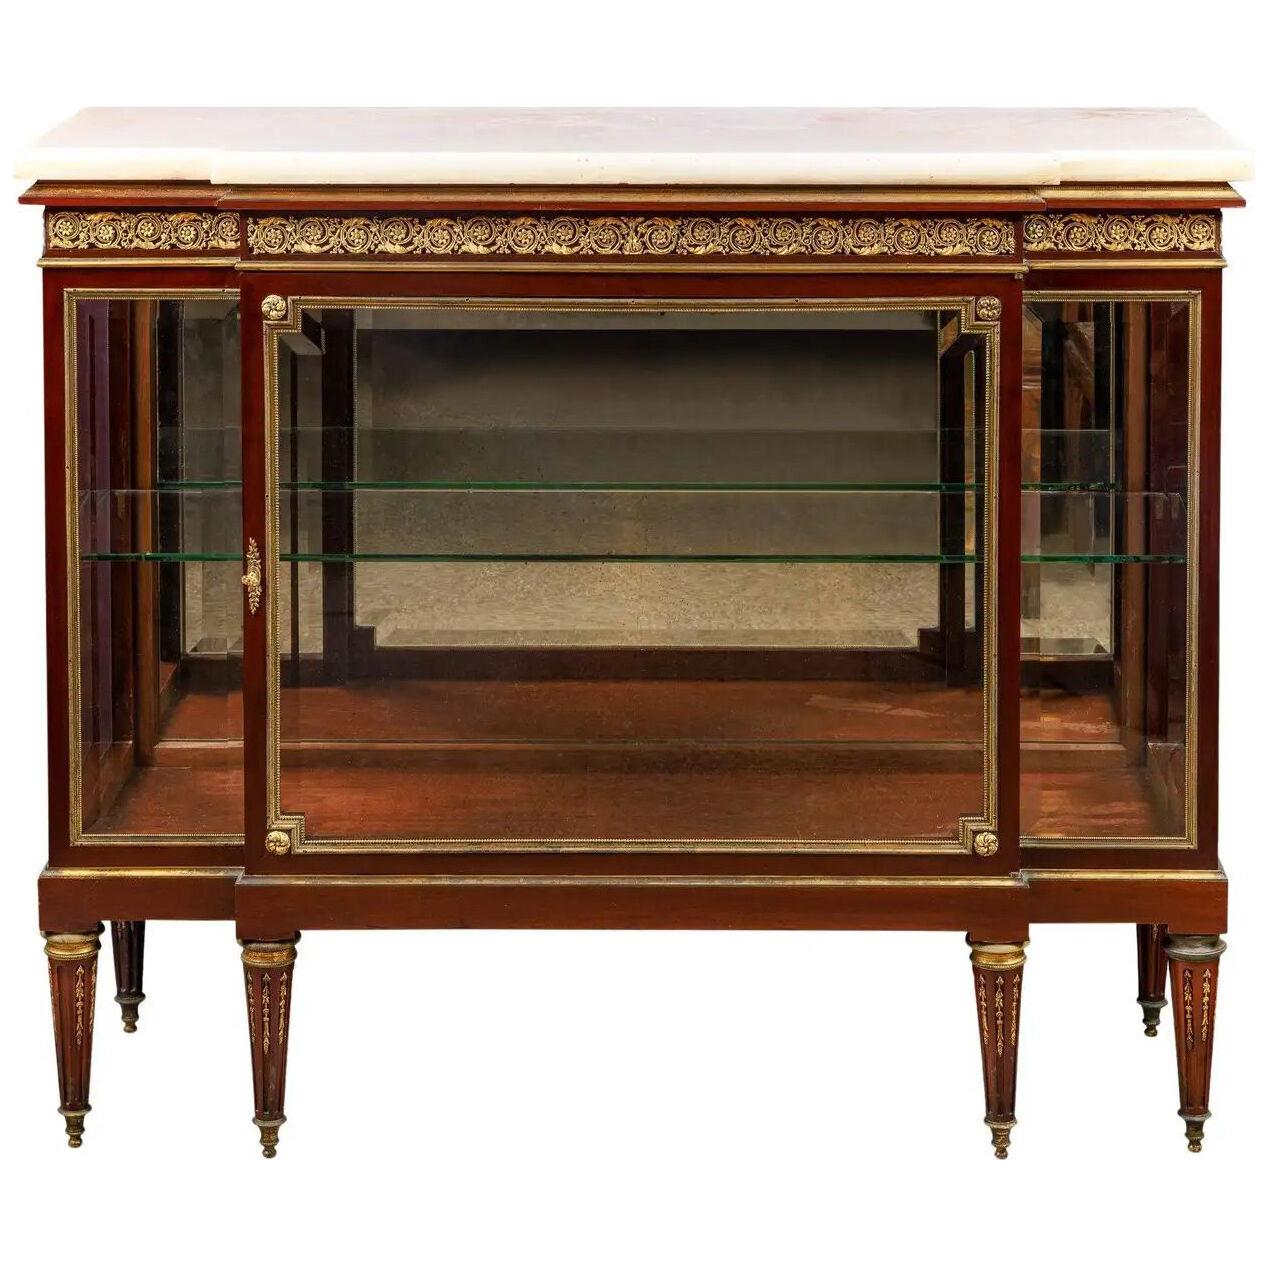 An Exquisite Quality French Ormolu-Mounted Vitrine Commode Cabinet, C. 1880